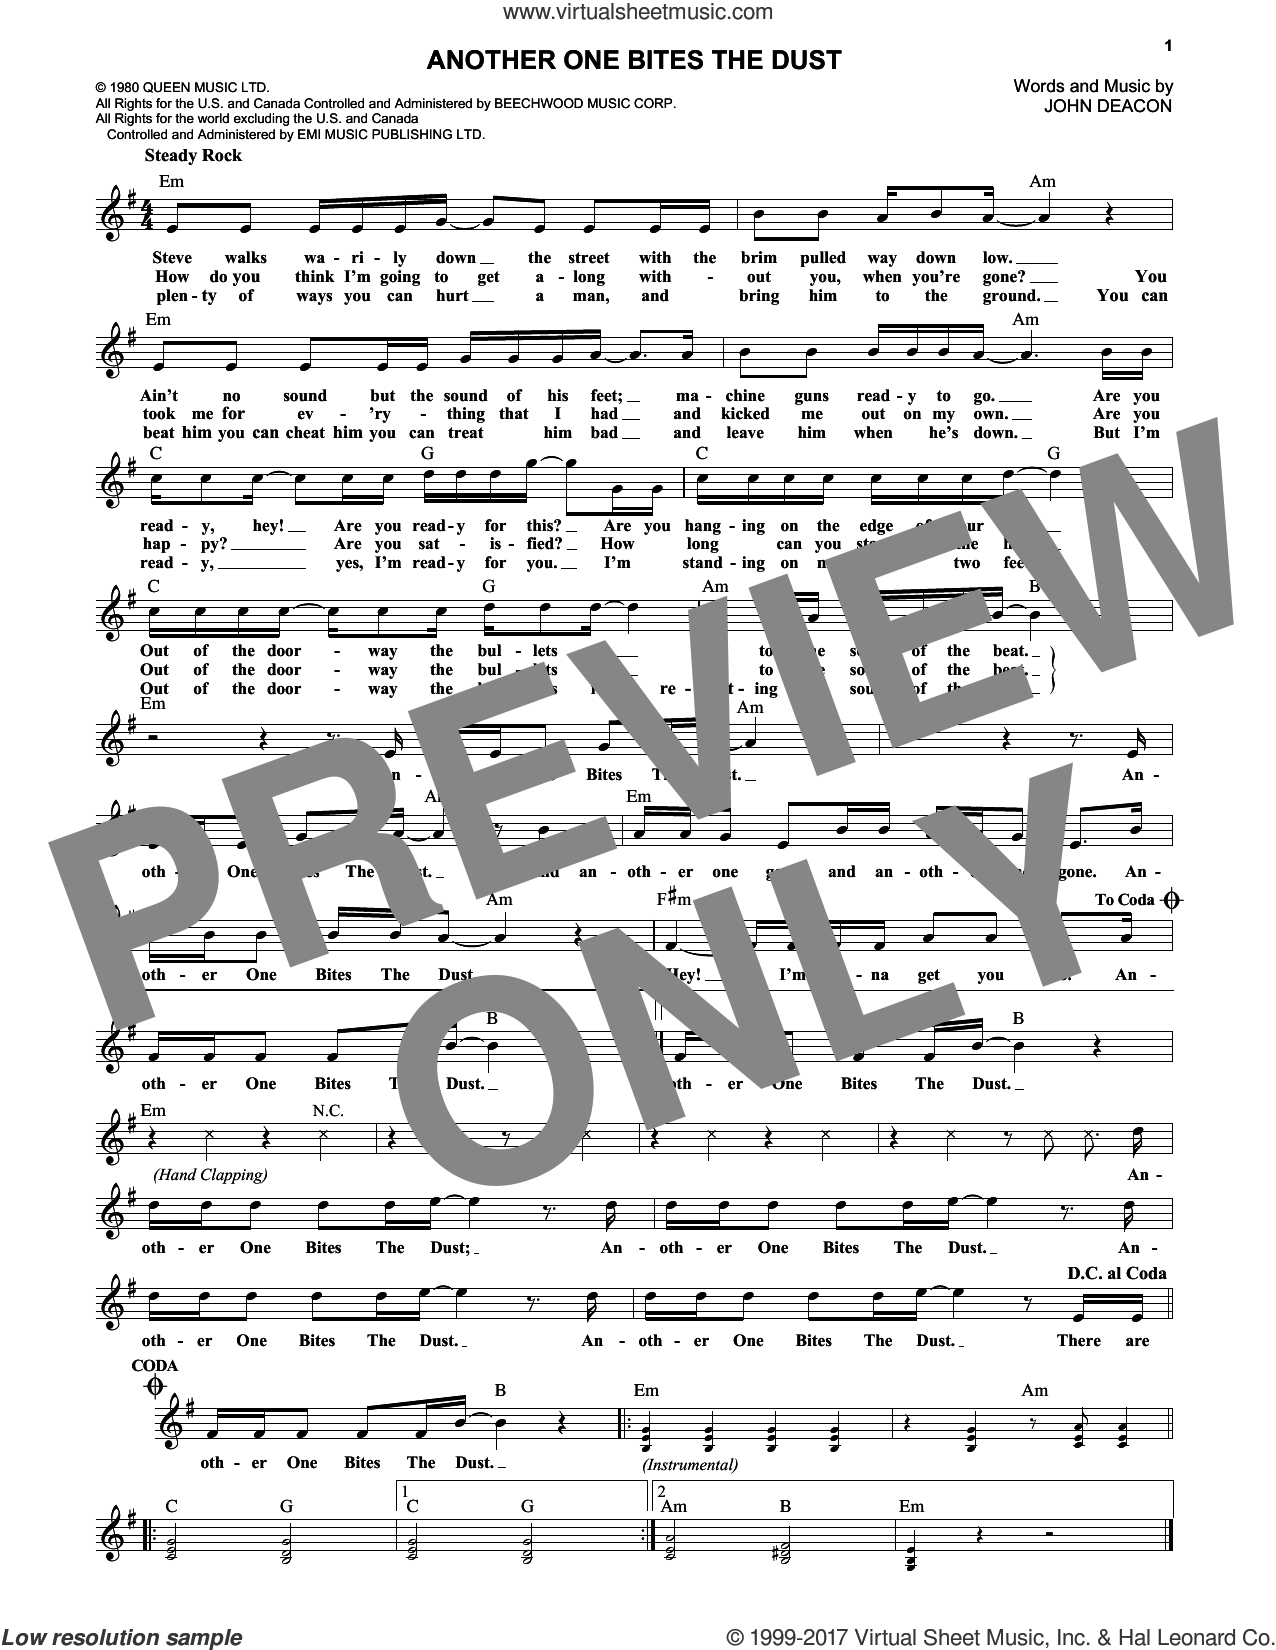 Queen Another One Bites the Dust Sheet Music in E Minor (transposable) -  Download & Print - SKU: MN0064174